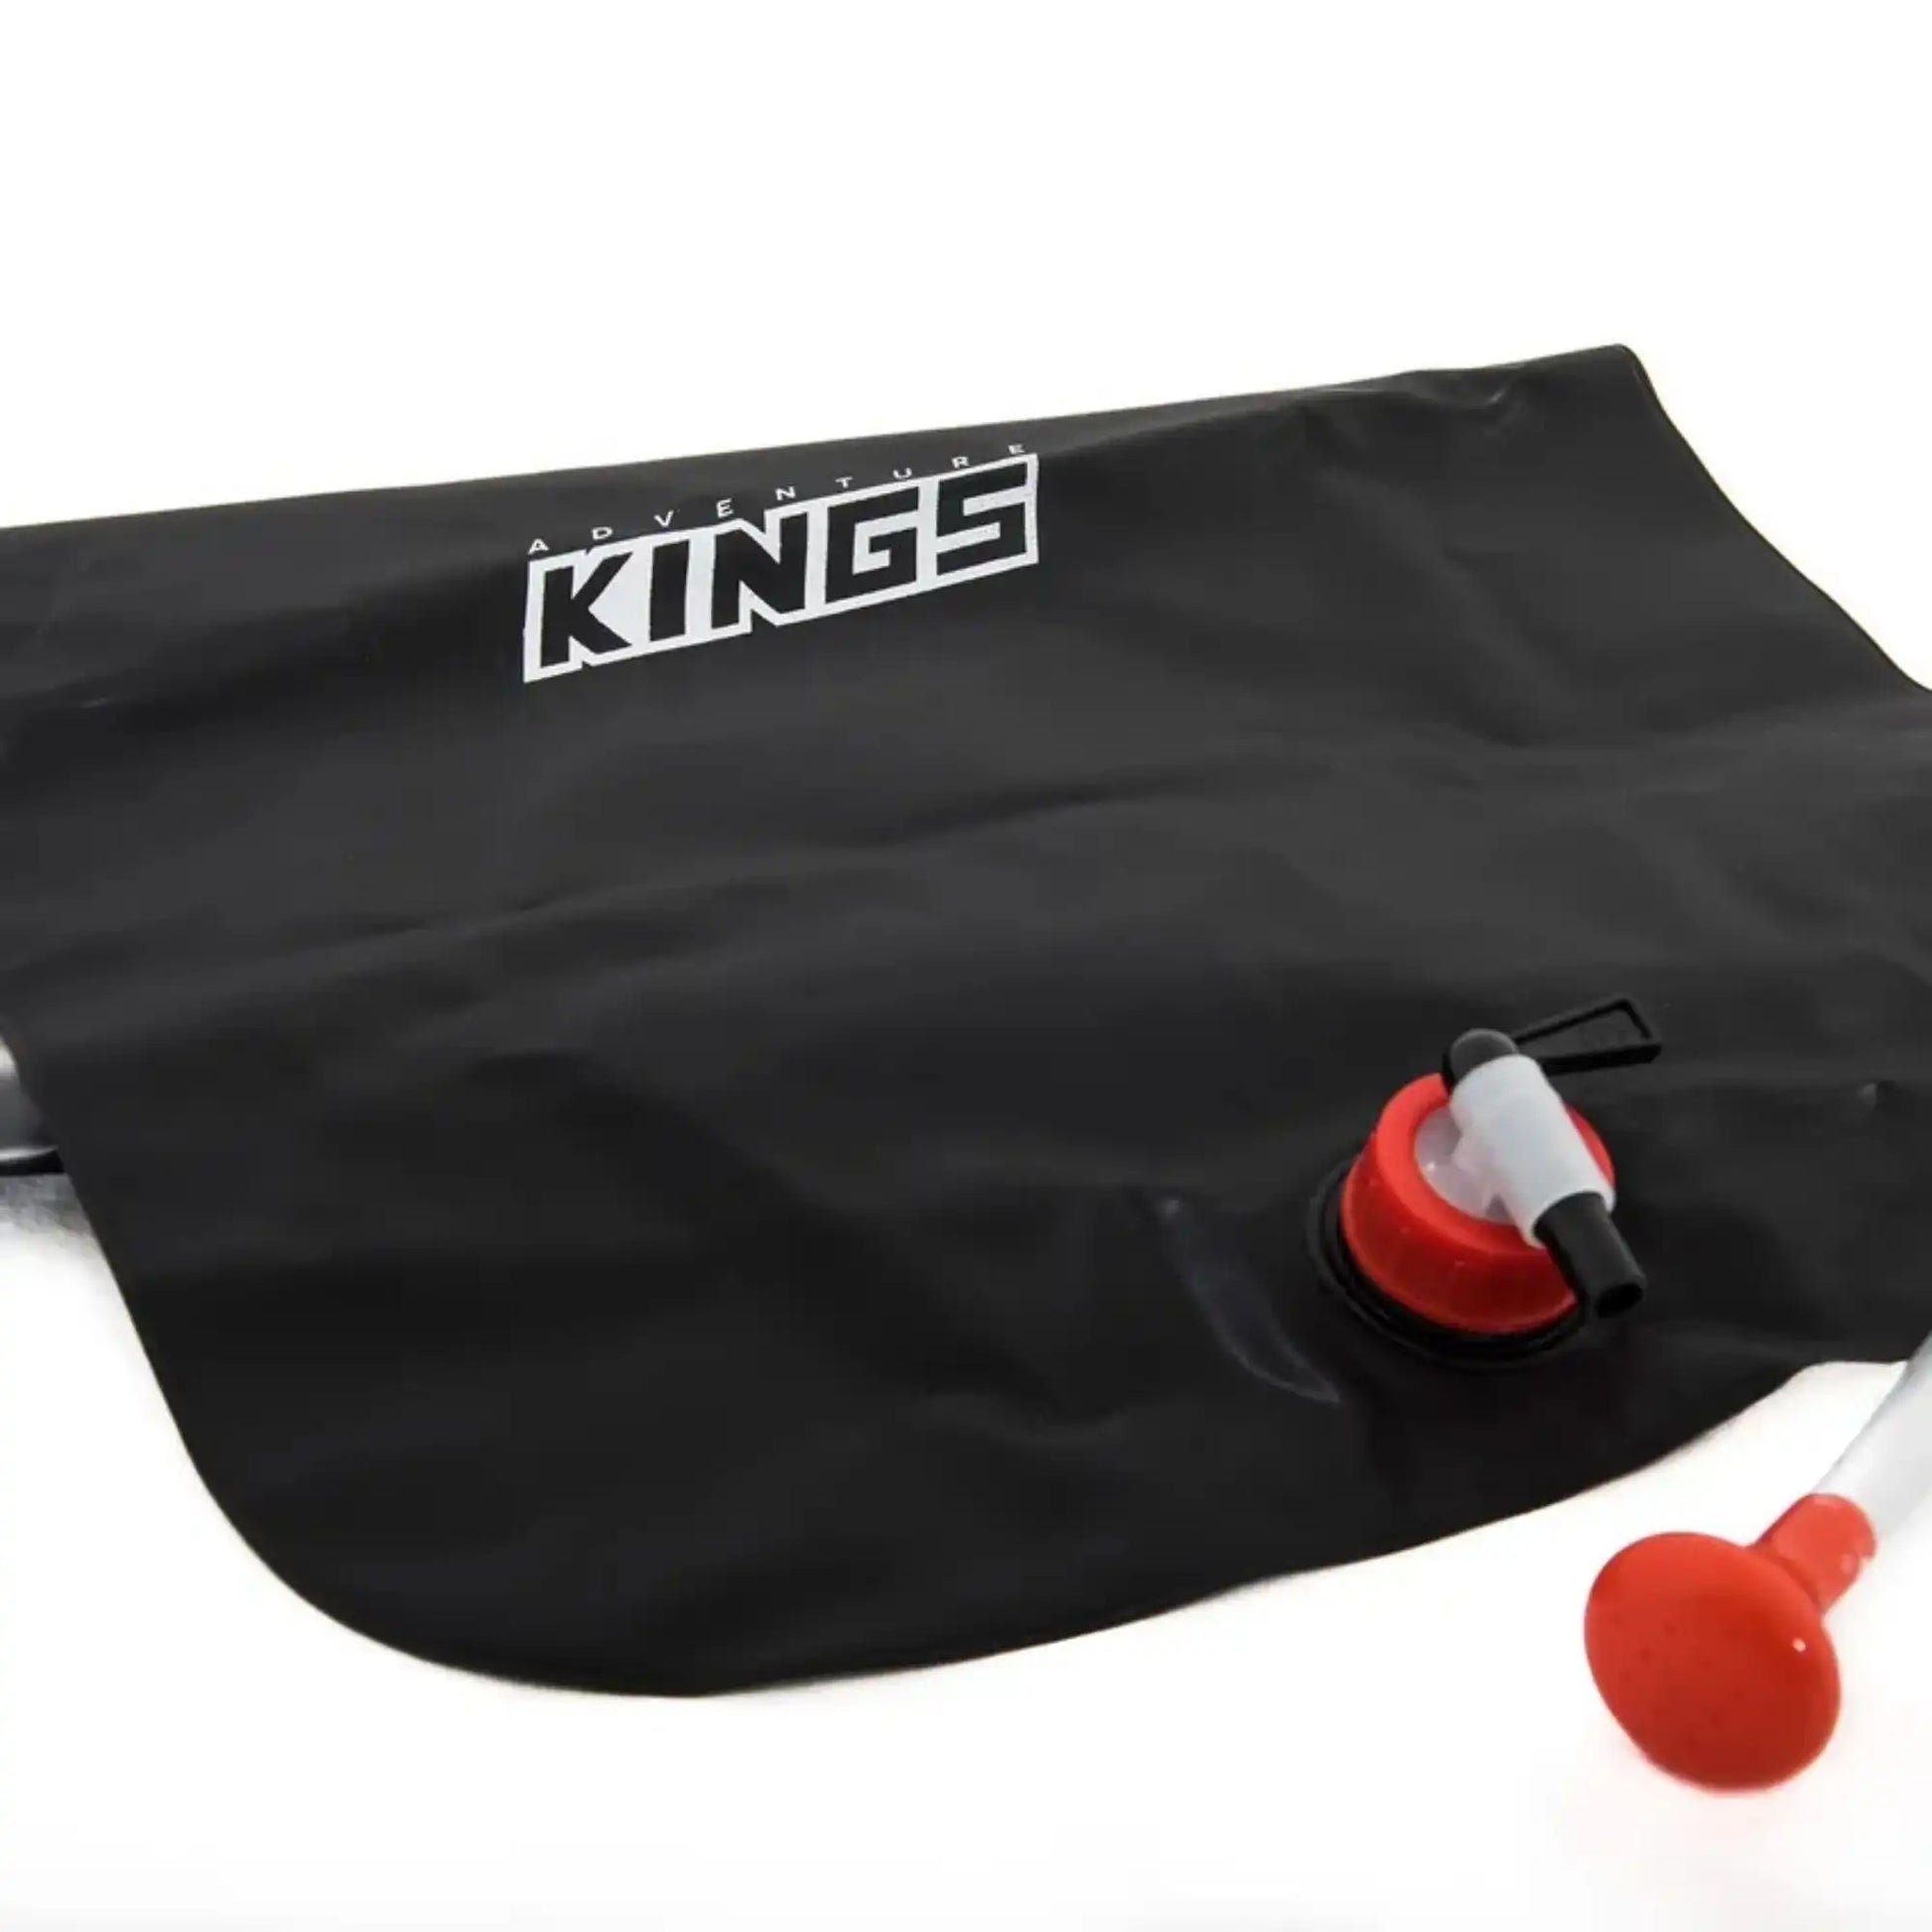 Adventure Kings Portable 20L Camping Solar Shower 